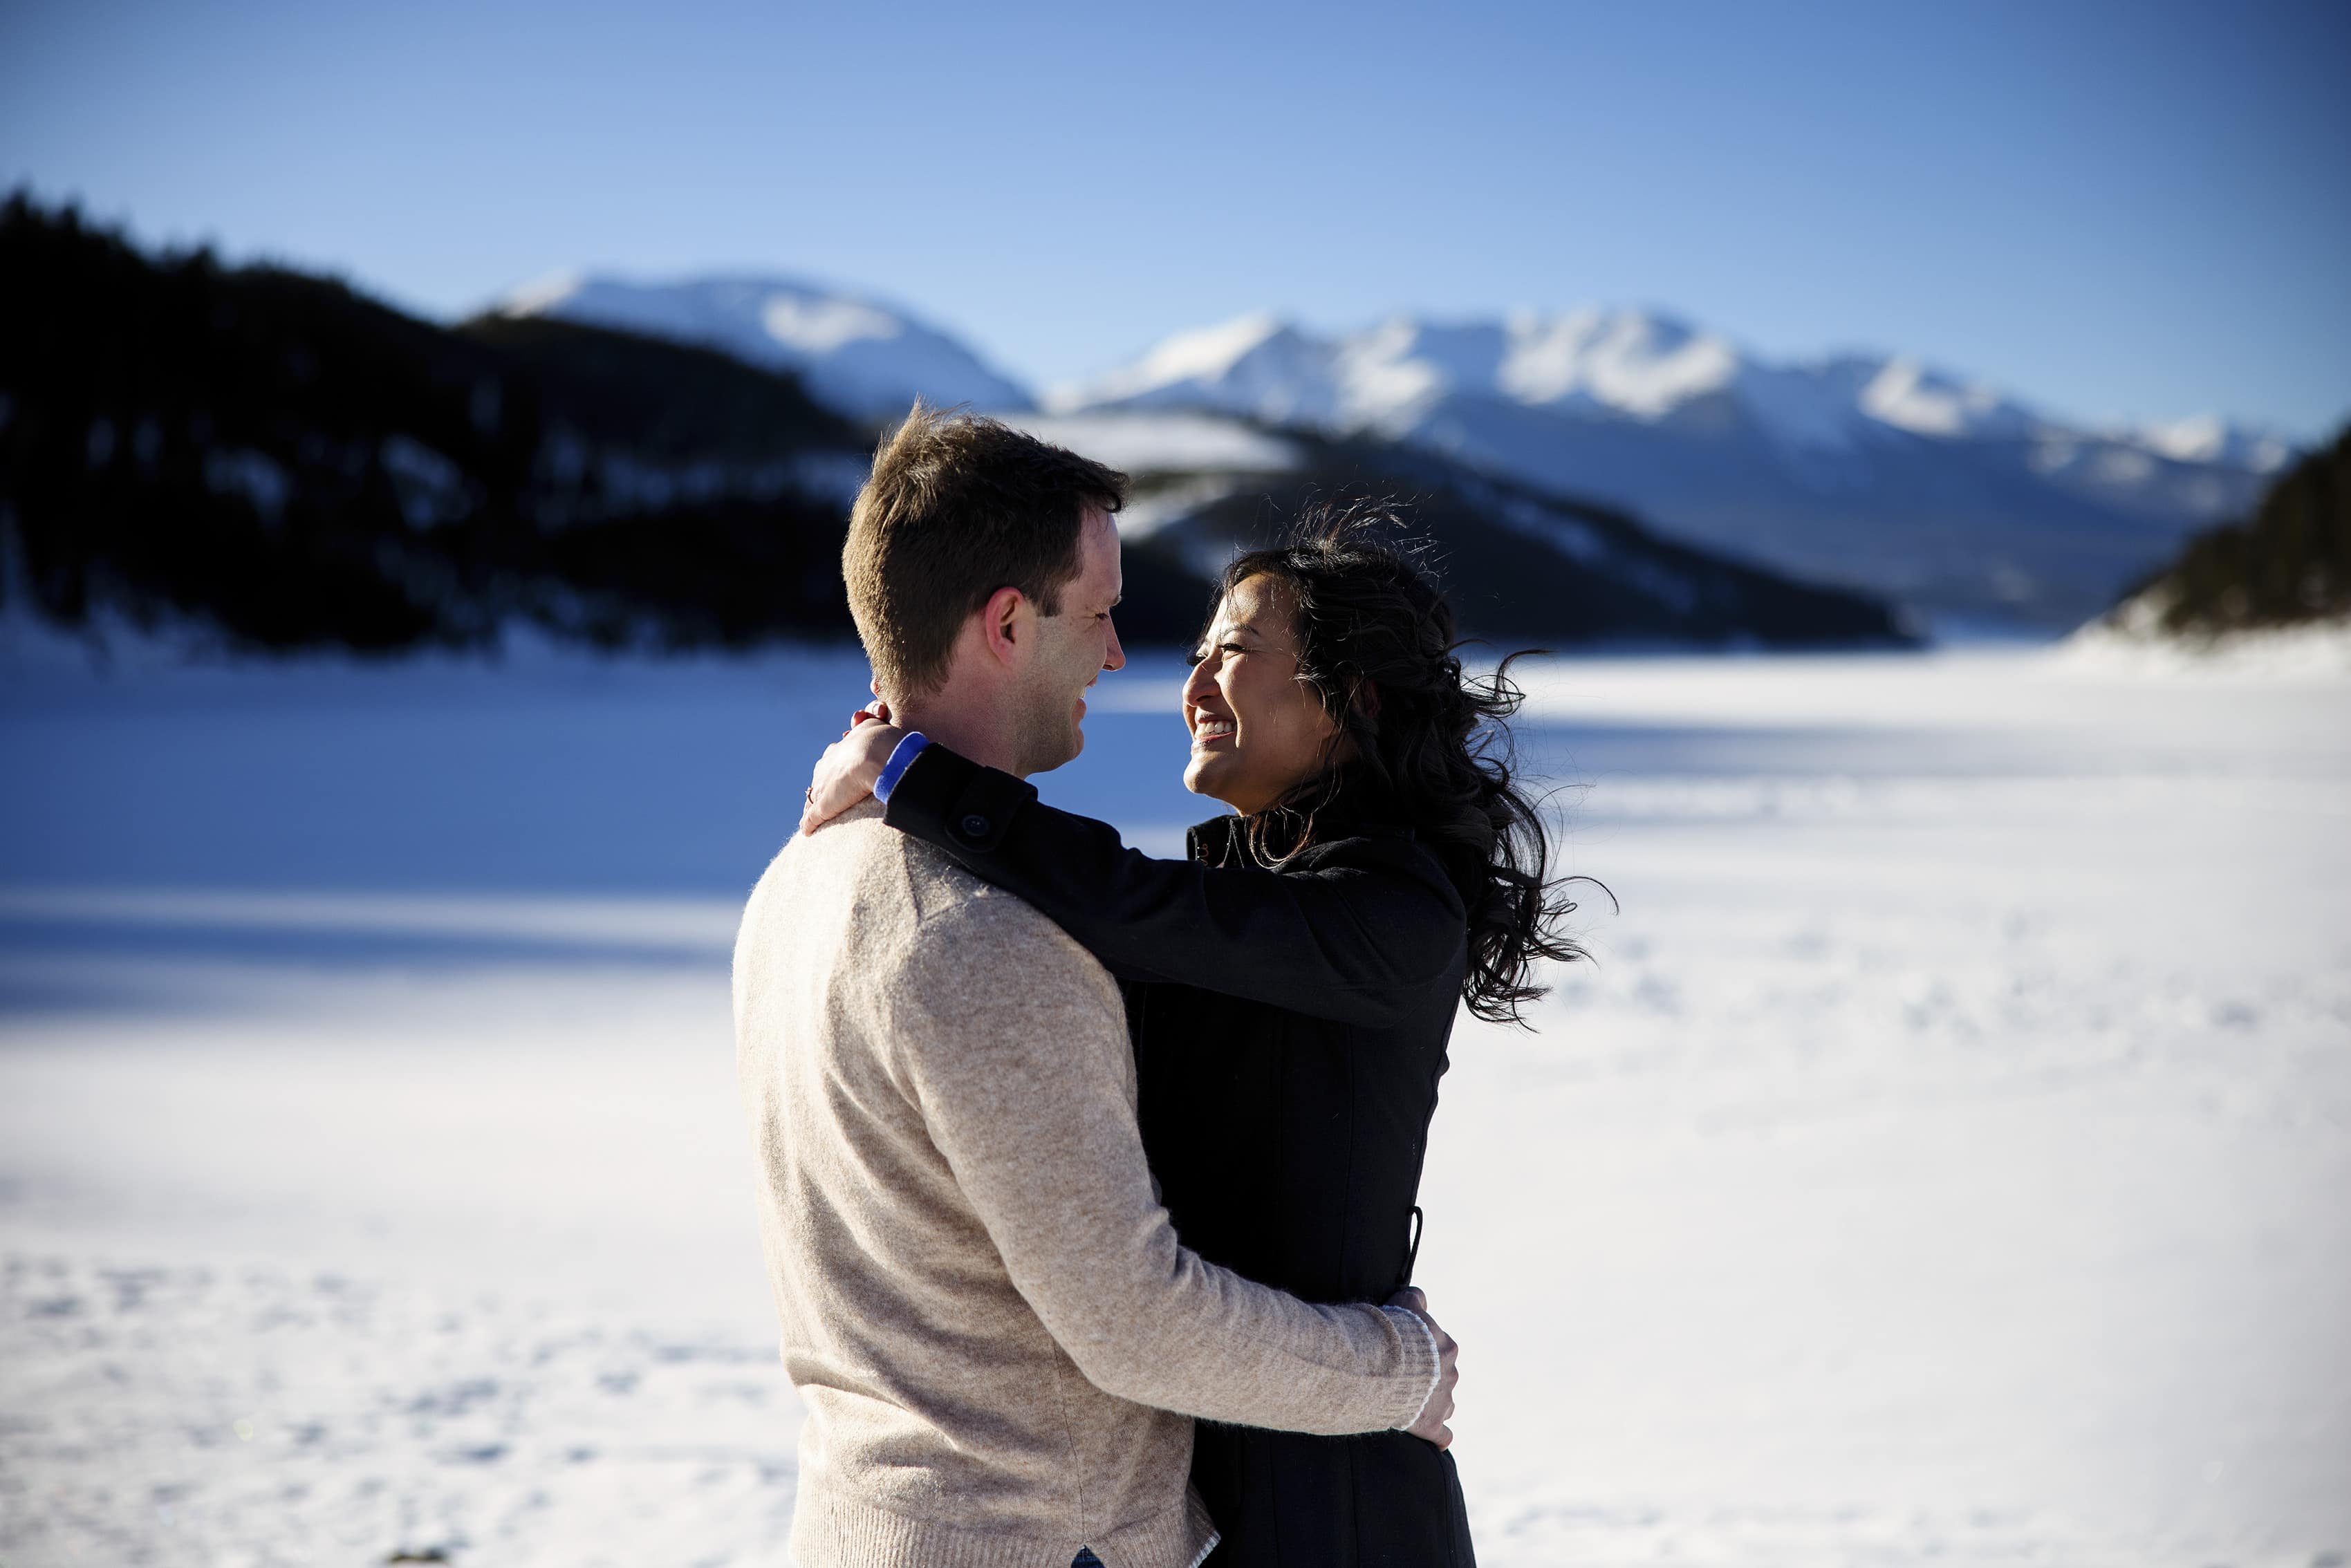 Nicole and Brett embrace on the ice at Dillon Reservoir during their engagment session